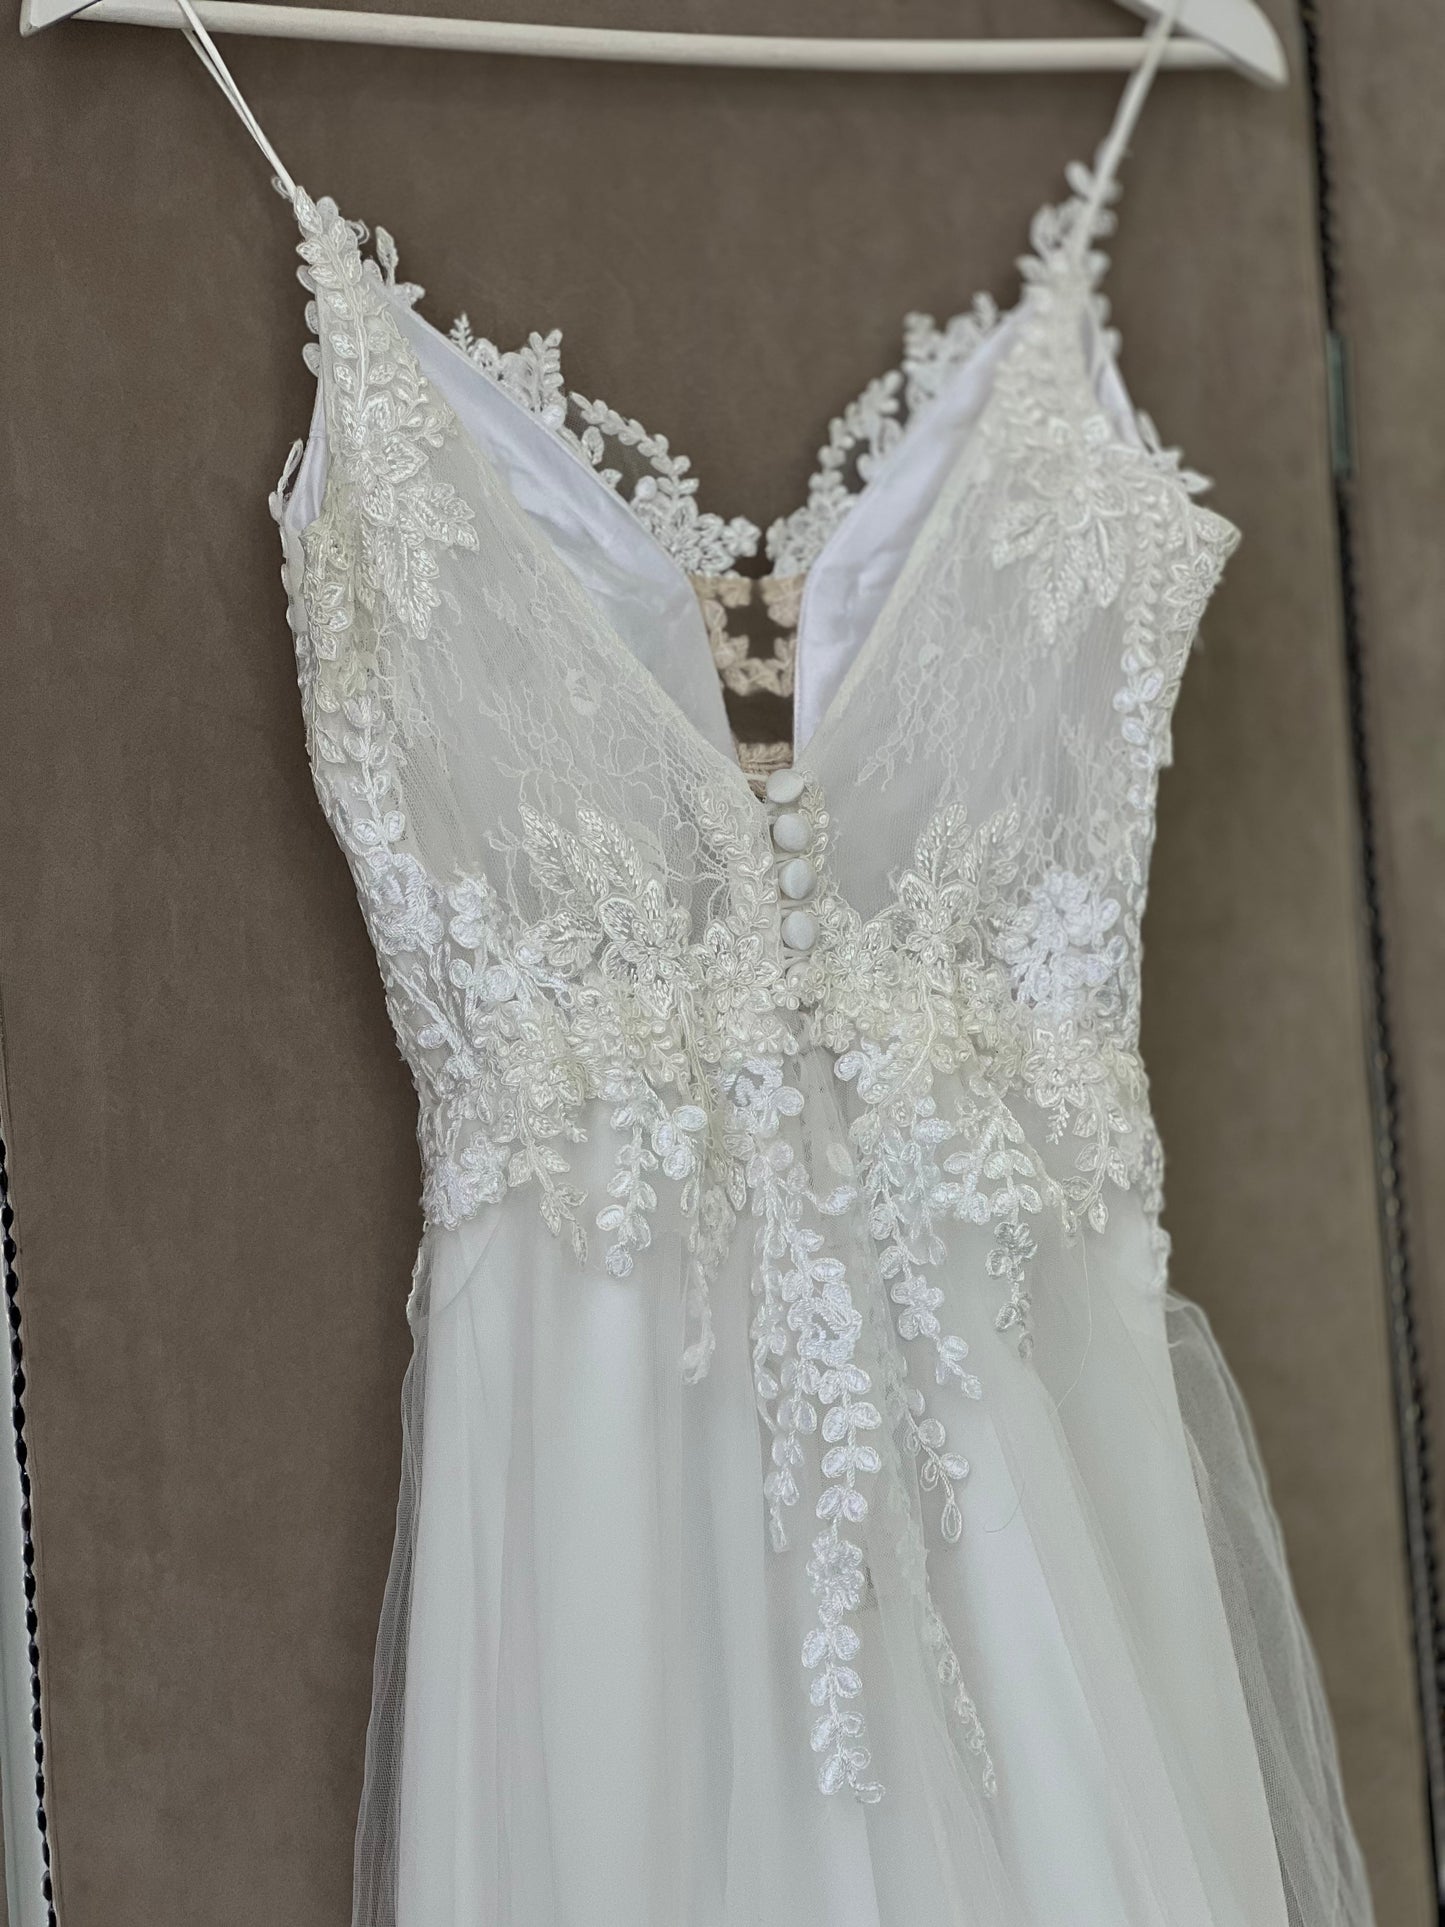 Code 2145: White tulle with handsewn lace, Size 6/8